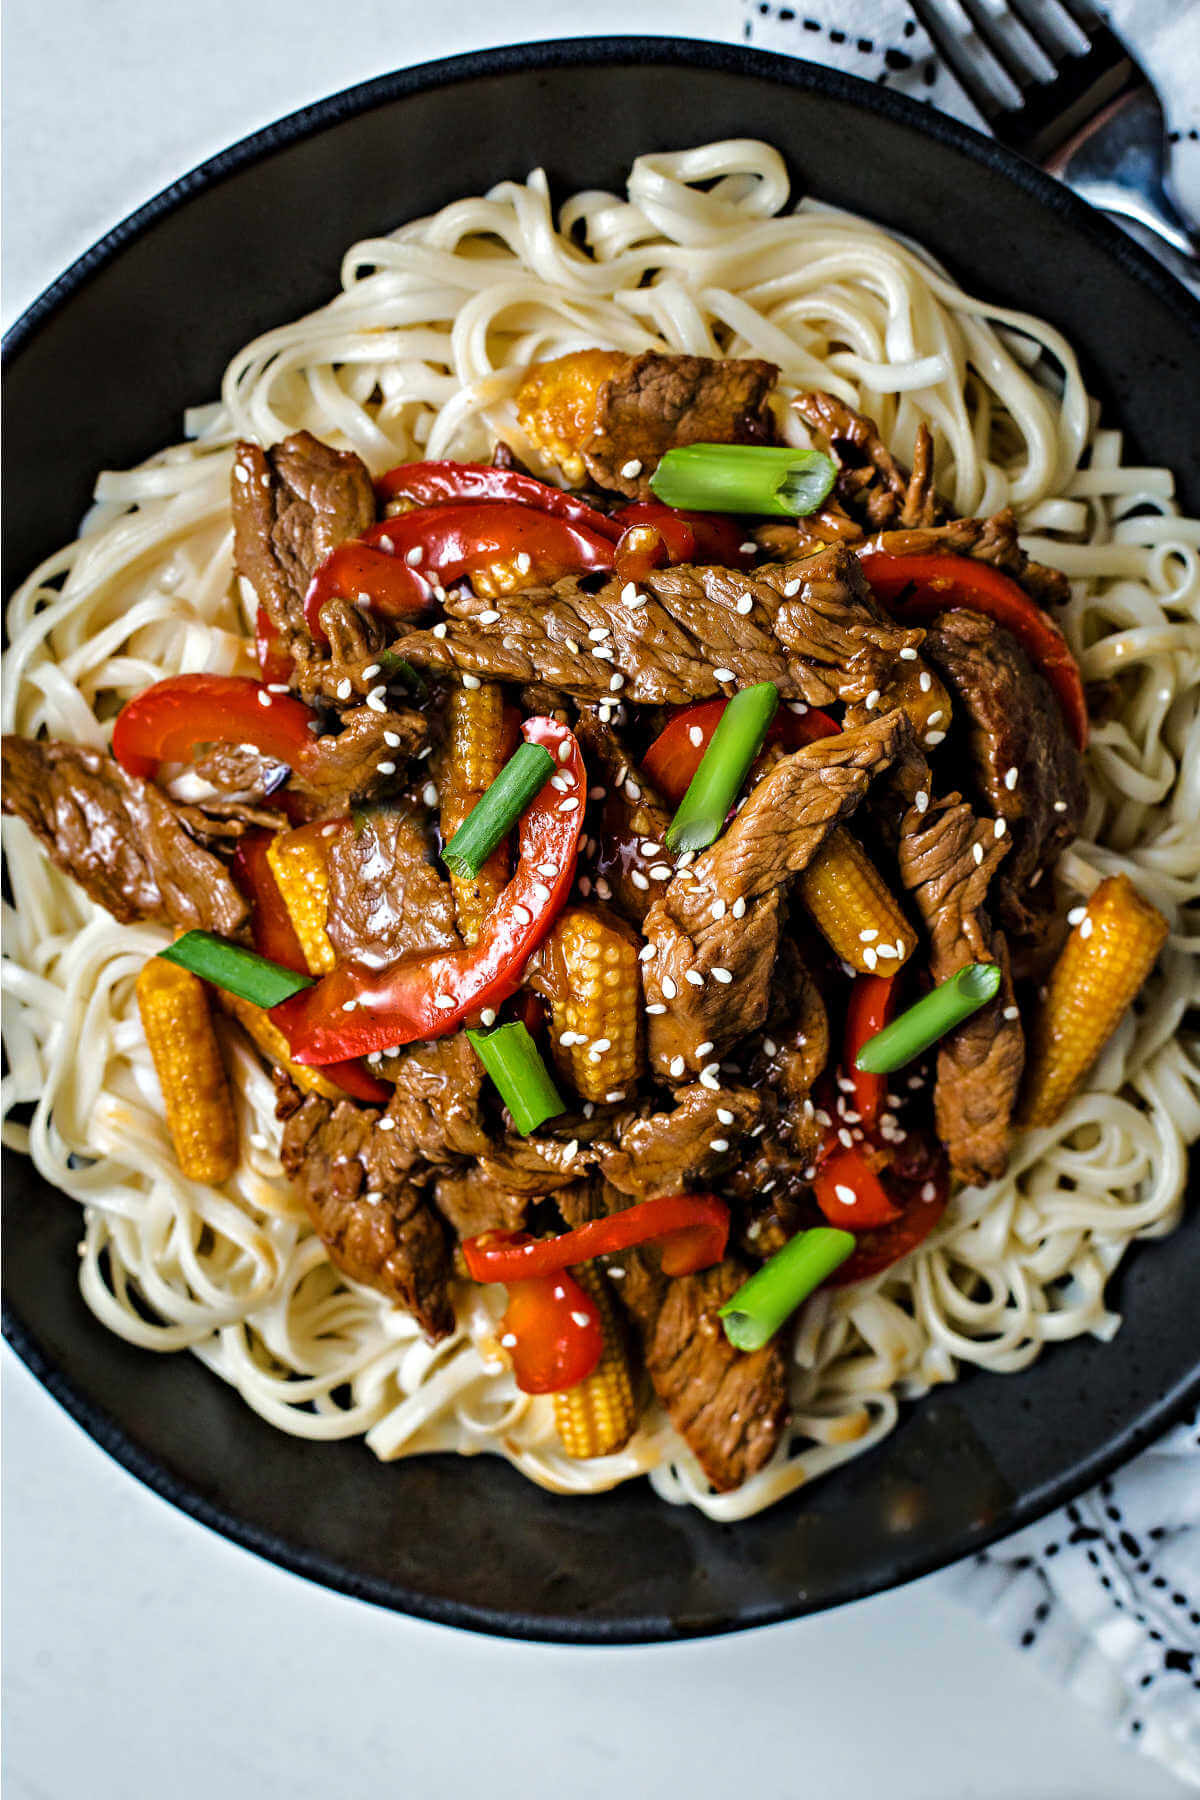 Korean Beef Stir Fry served over lo mein noodles and garnished with diced green onions and sesame seeds.